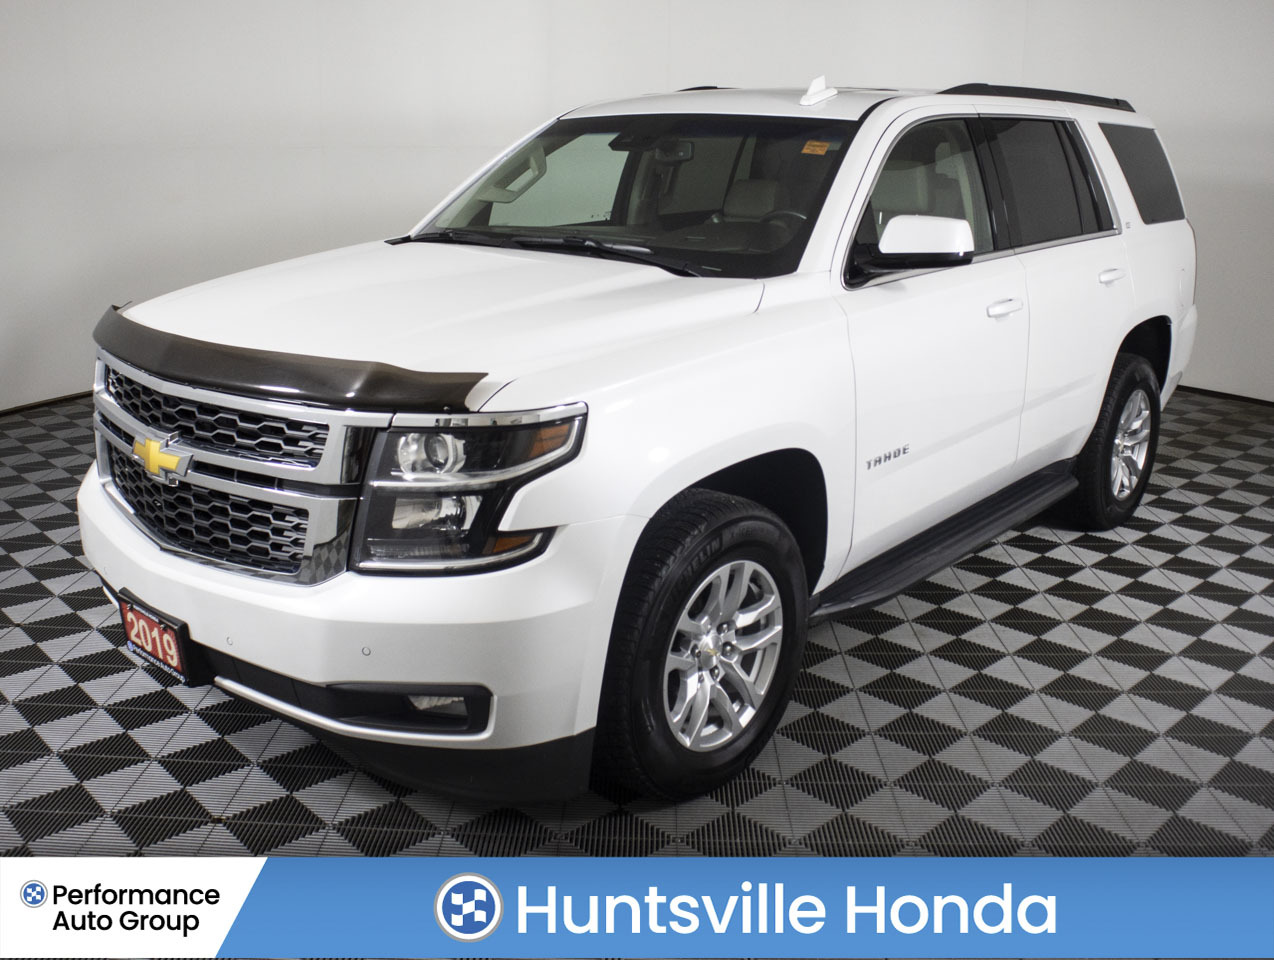 2019 Chevrolet Tahoe LT- 53L V8- 4WD- Leather-Sunroof- 3rd Row